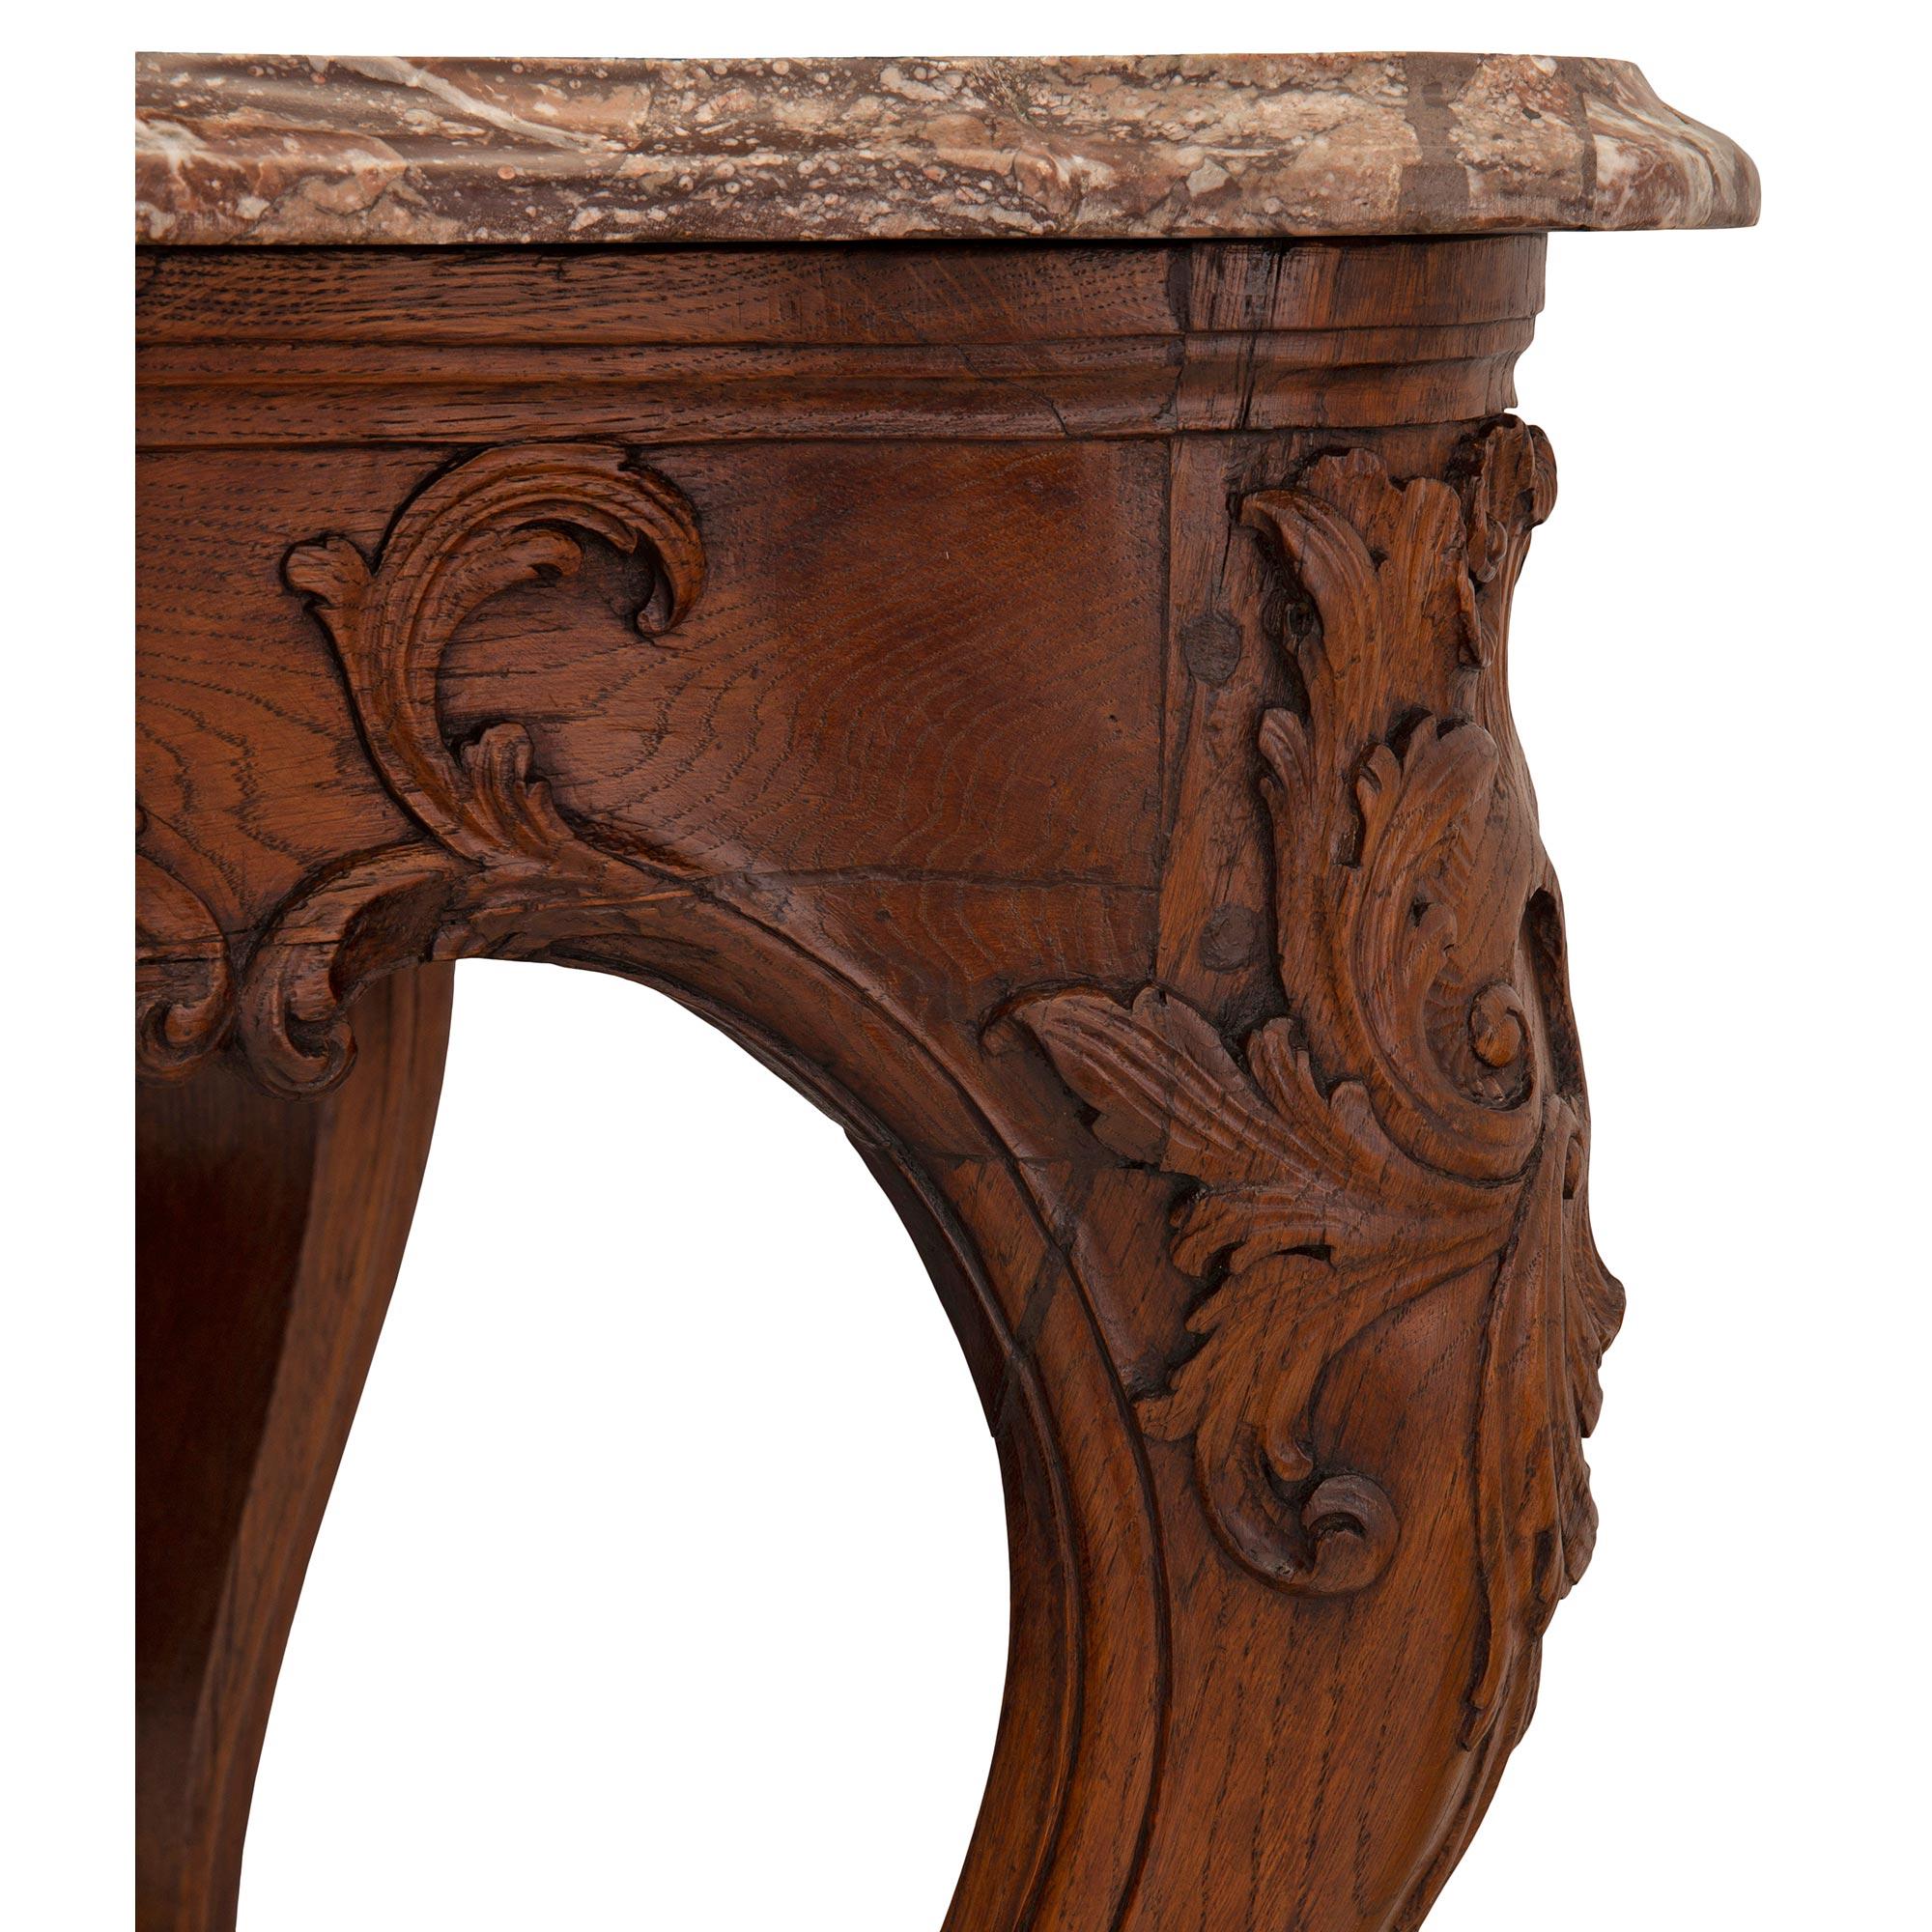 French 18th Century Régence Period Walnut And Marble Center Table For Sale 1